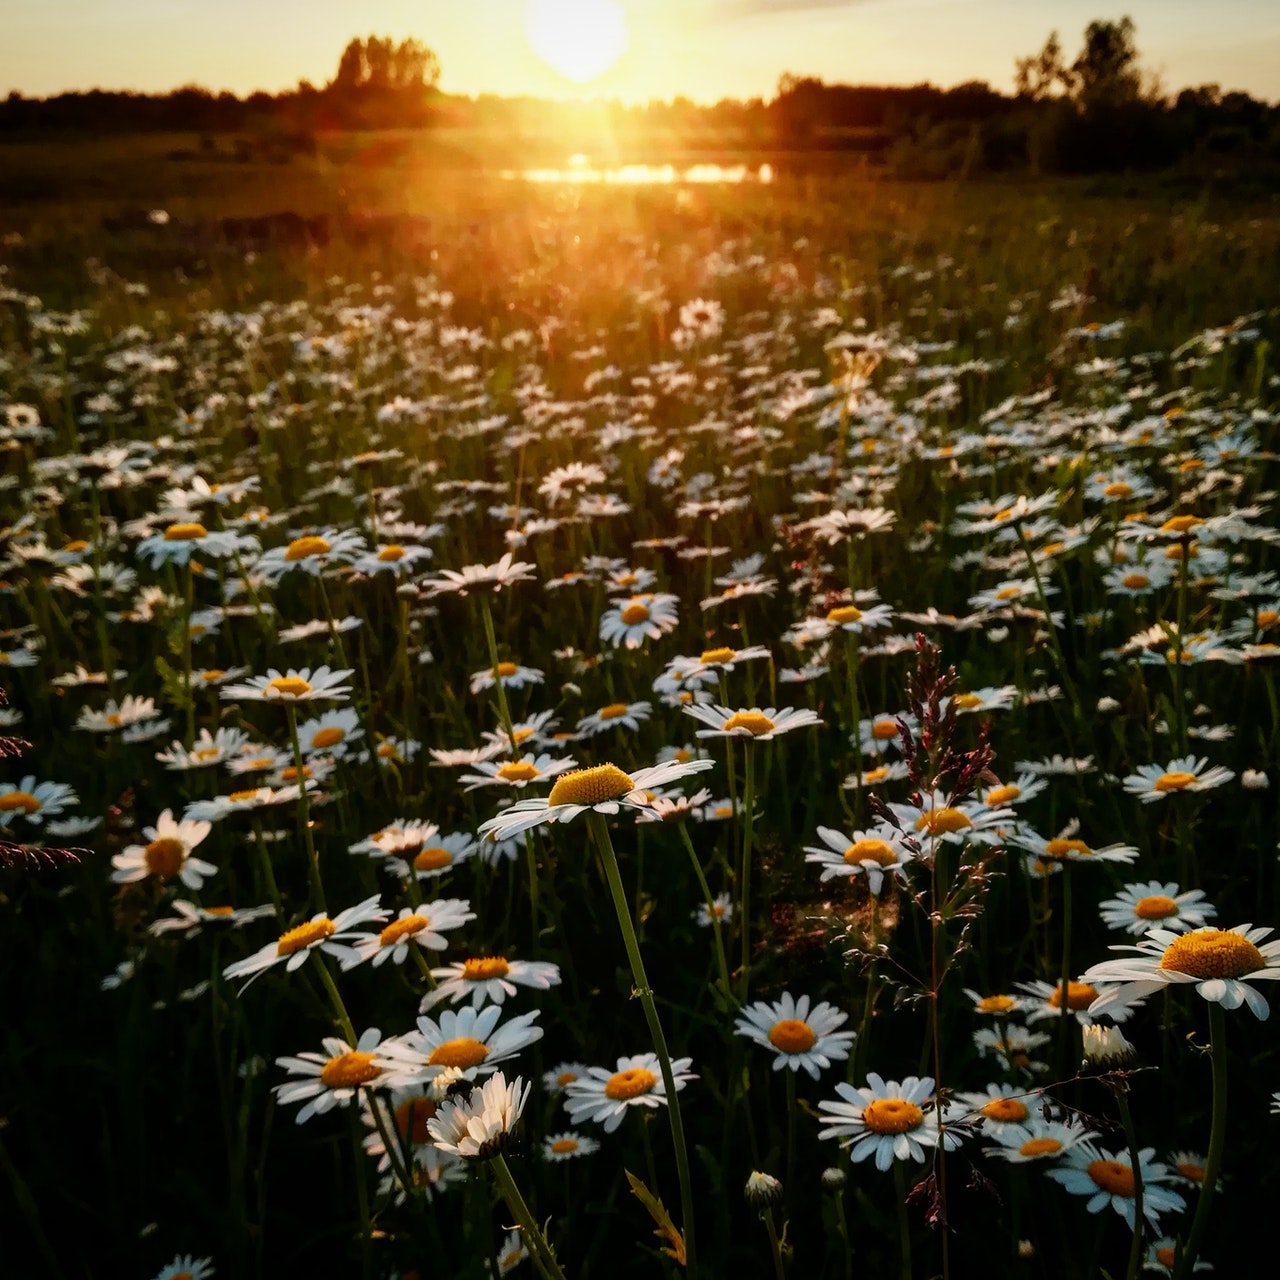 a field of daisies with the sun setting in the background.